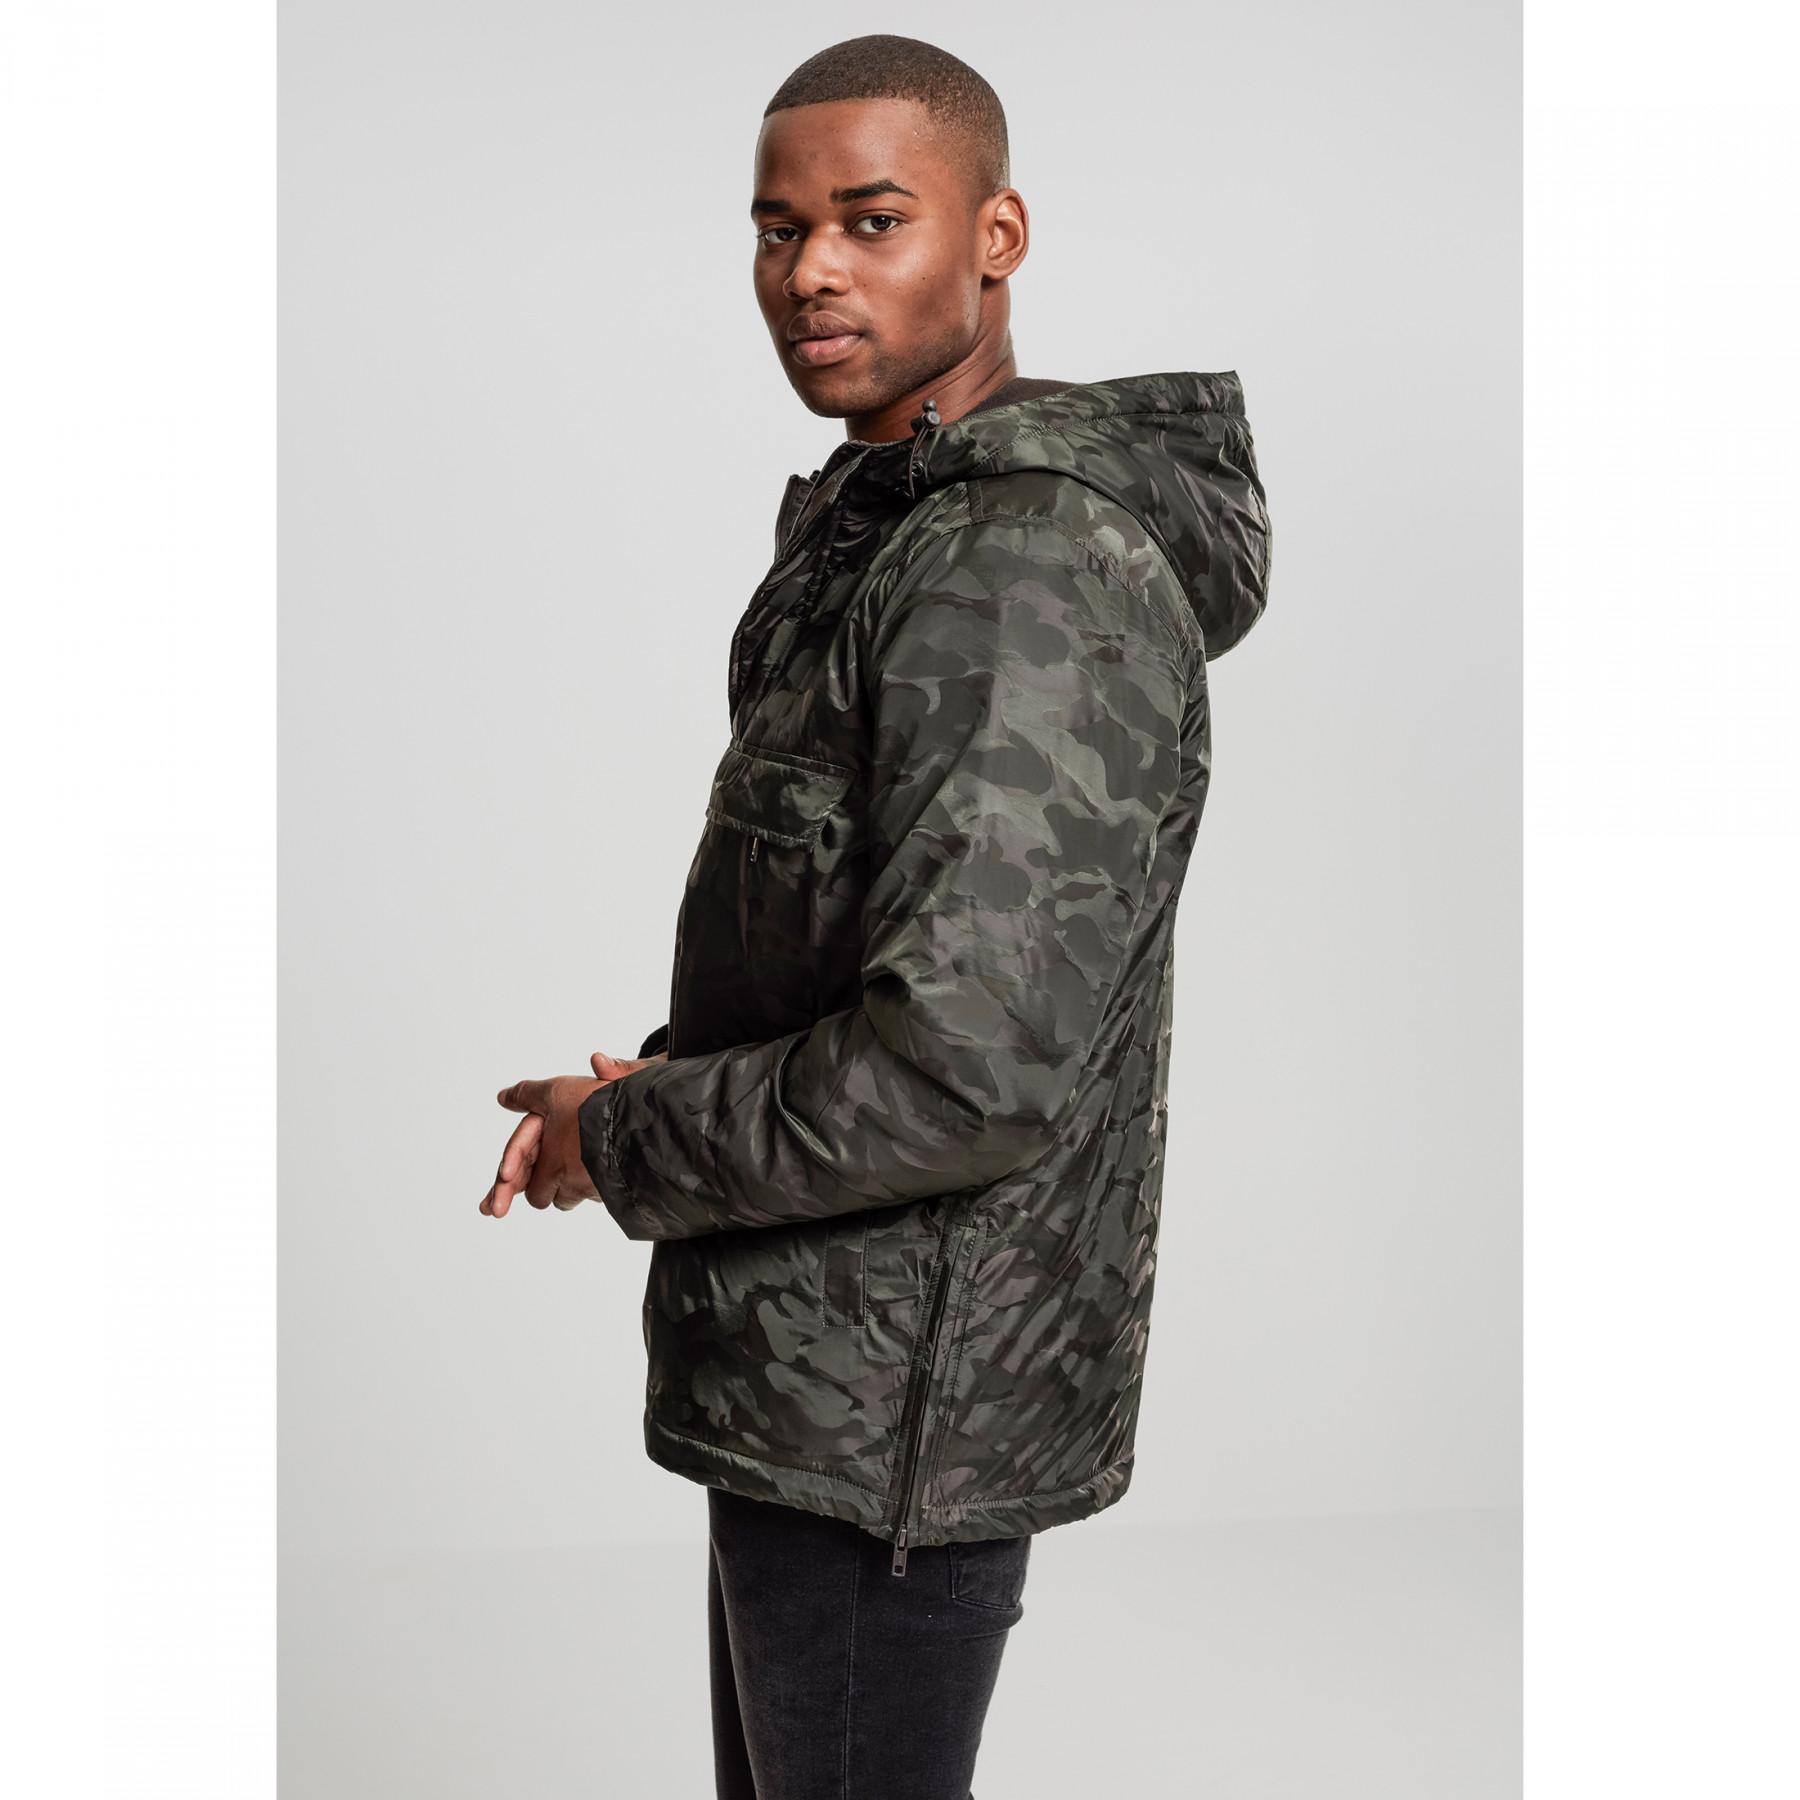 Windproof Urban Classic Padded pullover over